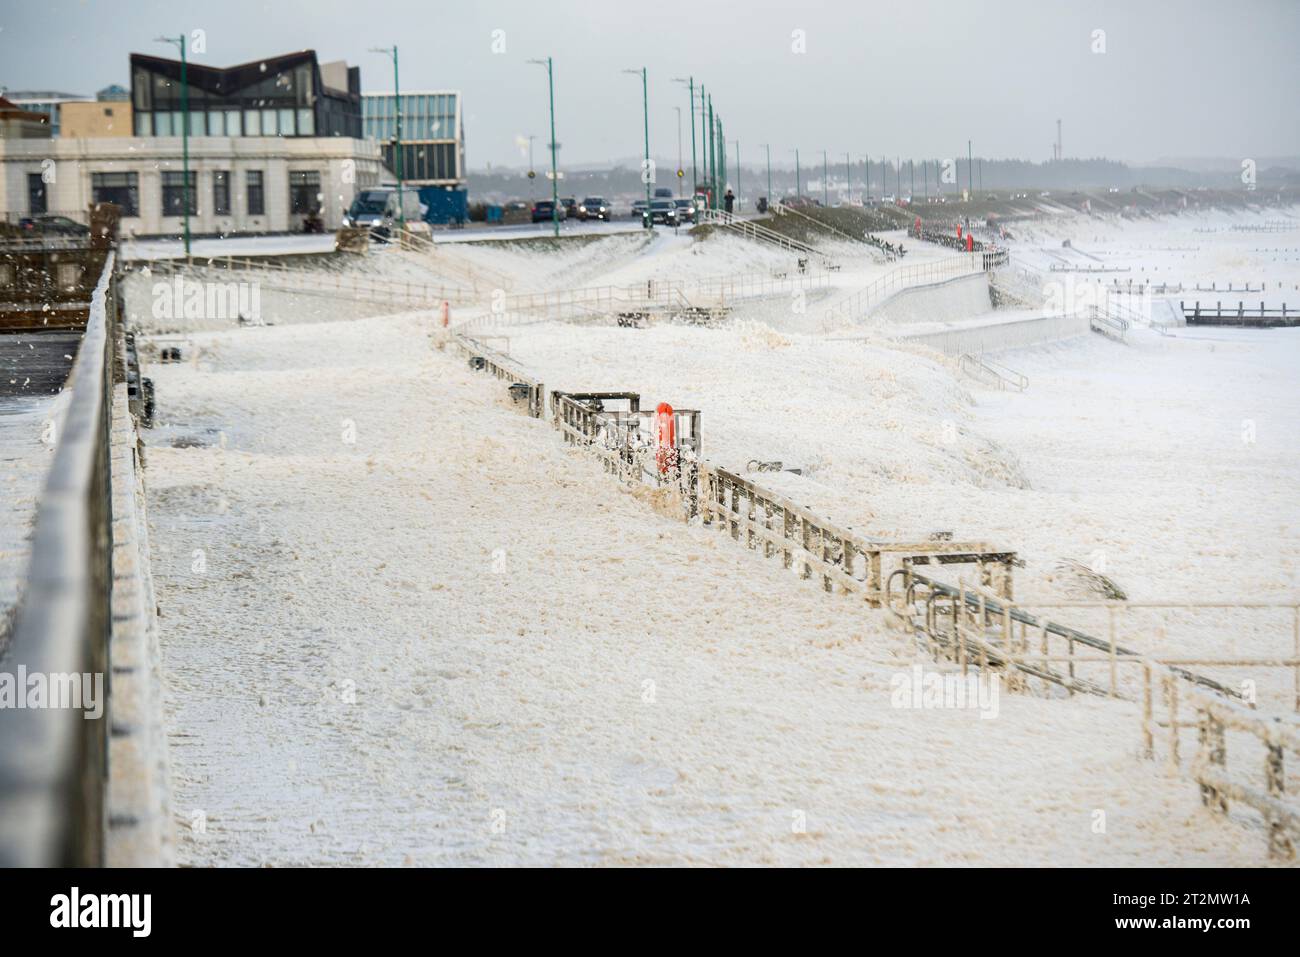 Sea foam covers the shore and promenade on Aberdeen Beach Scotland during Storm Babet.  Credit Paul Glendell / Alamy Live News Stock Photo